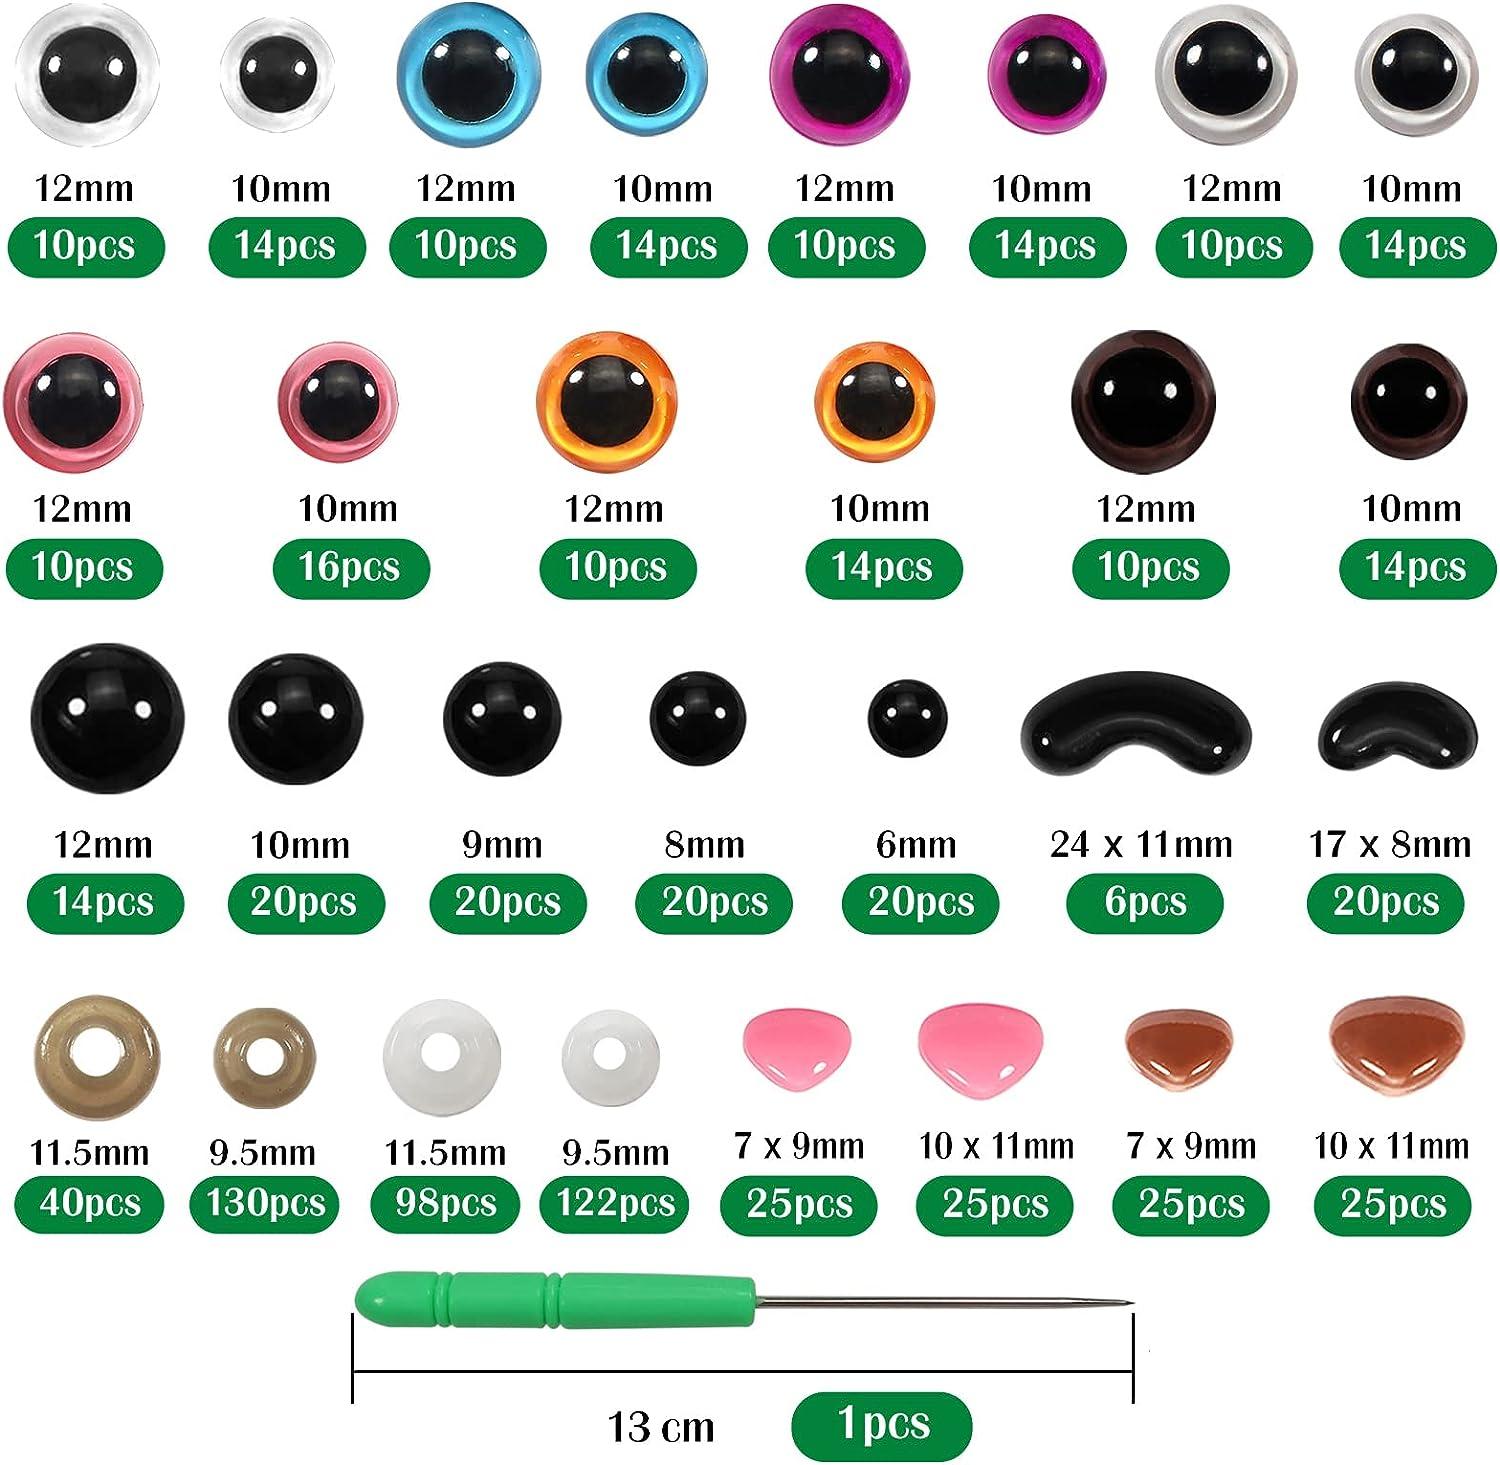  TOAOB 120 Sets Black Safety Eyes 10mm 12mm 14mm Crafts Doll  Eyes with Eyelid Washers for Stuffed Crochet Plush Animals Amigurumis  Crafts Making